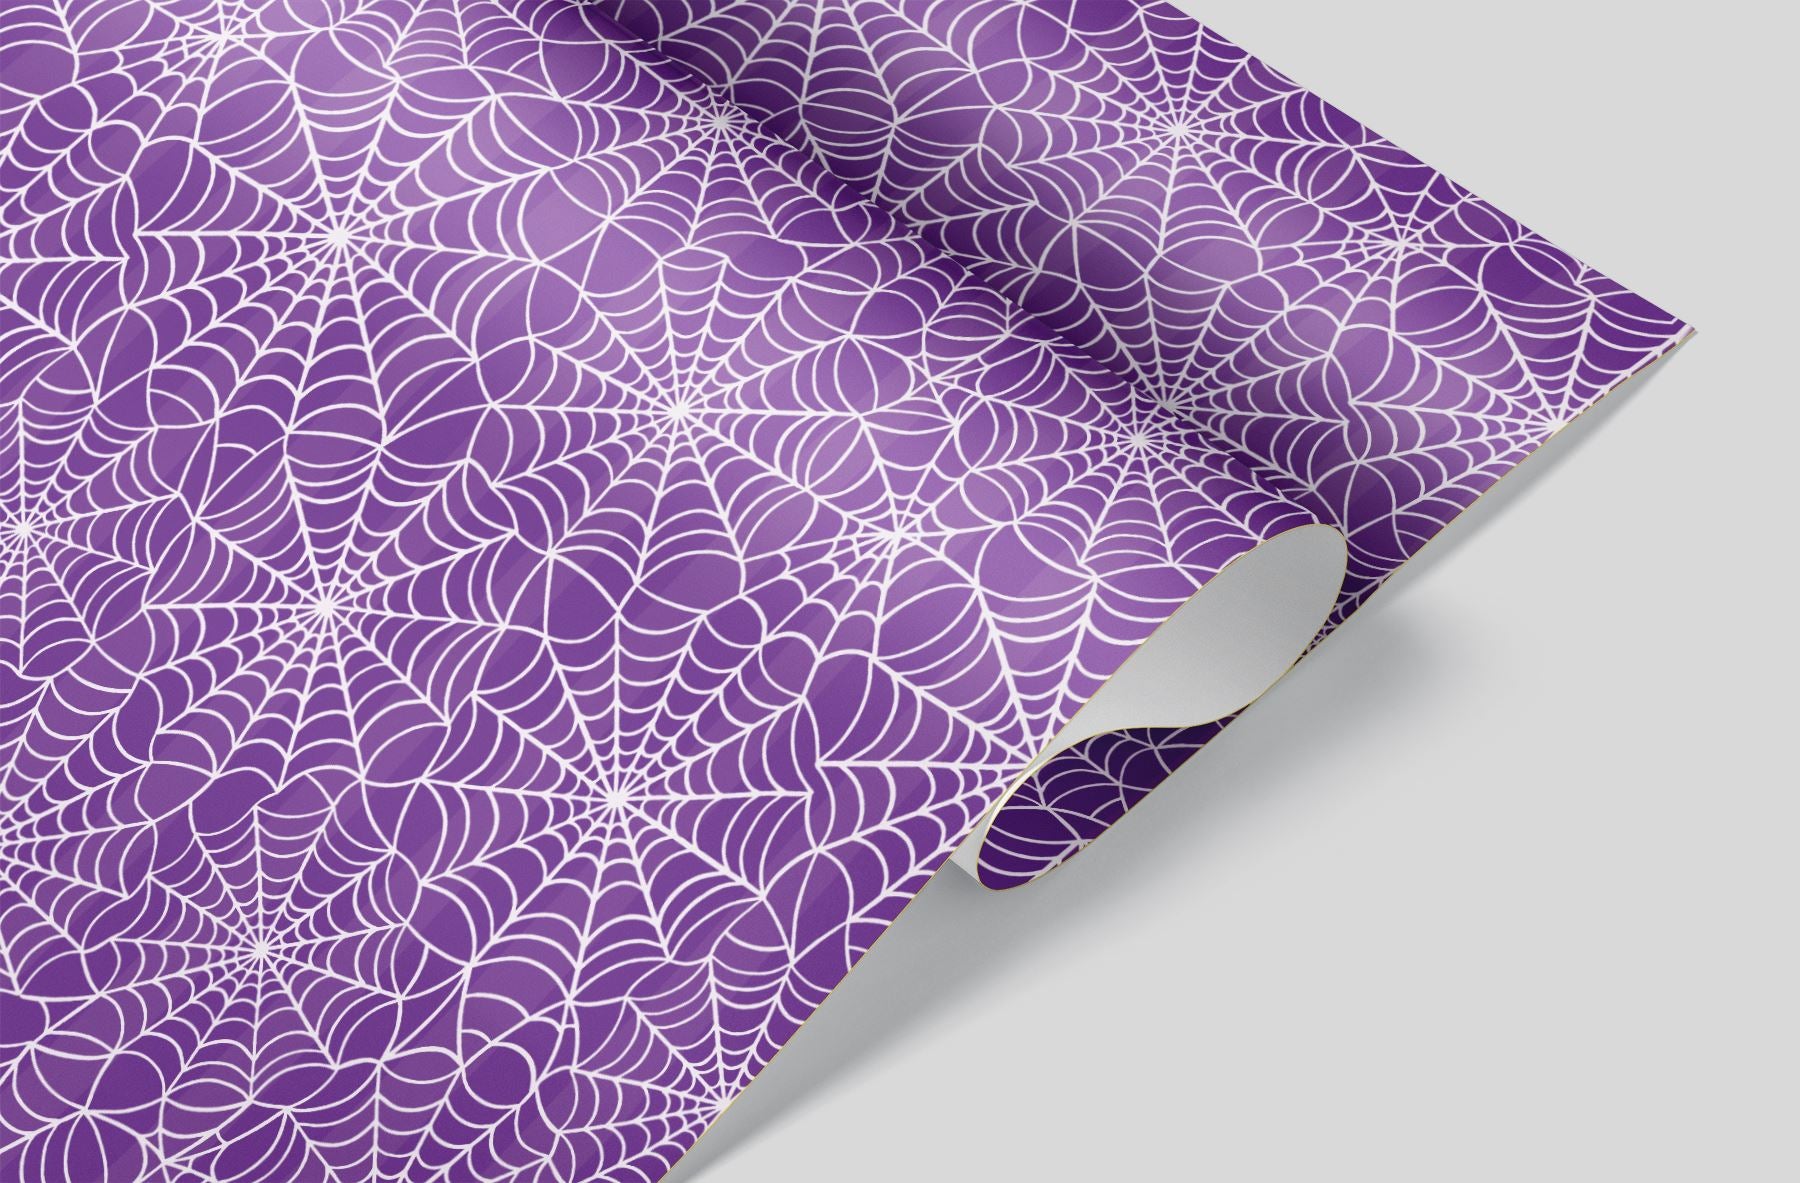 Giant Spider Webs on Purple Wrapping Paper Alexander&#39;s 